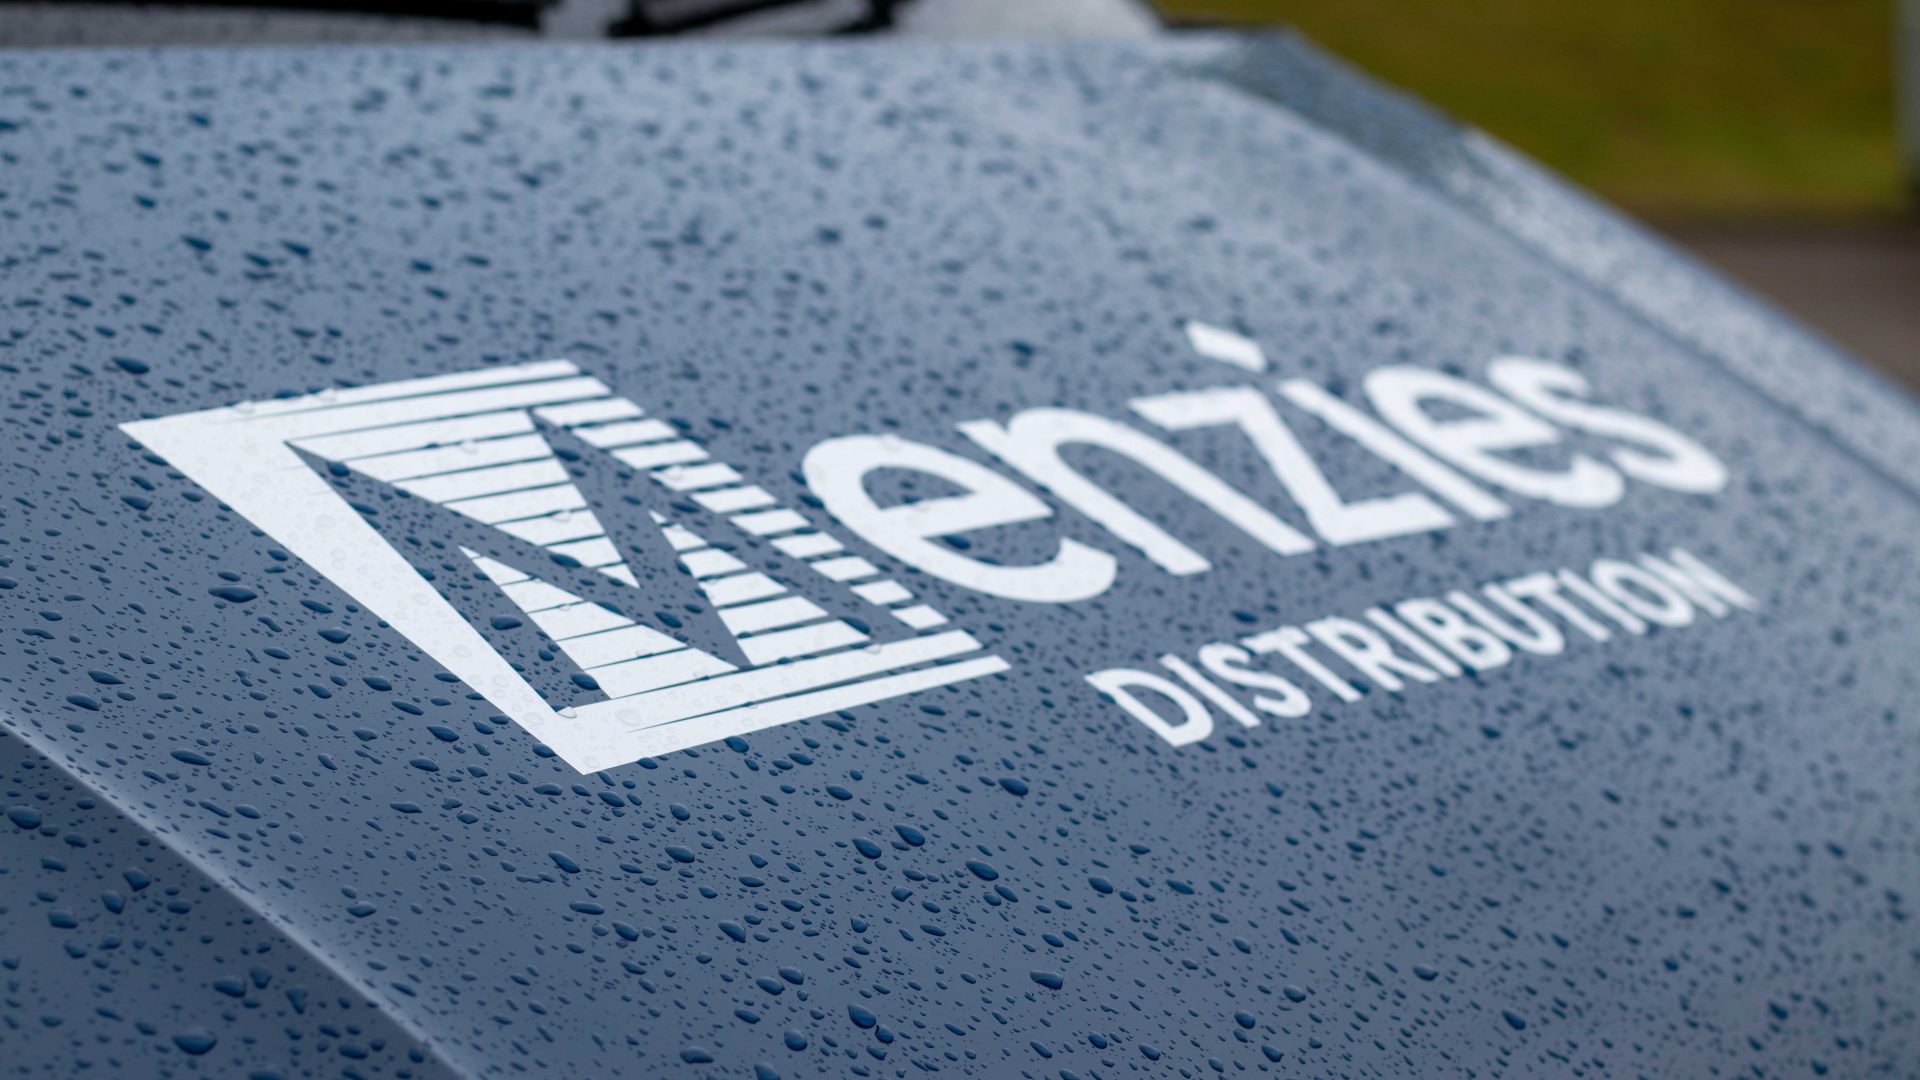 Menzies Distribution secures £14 million funding from RBS